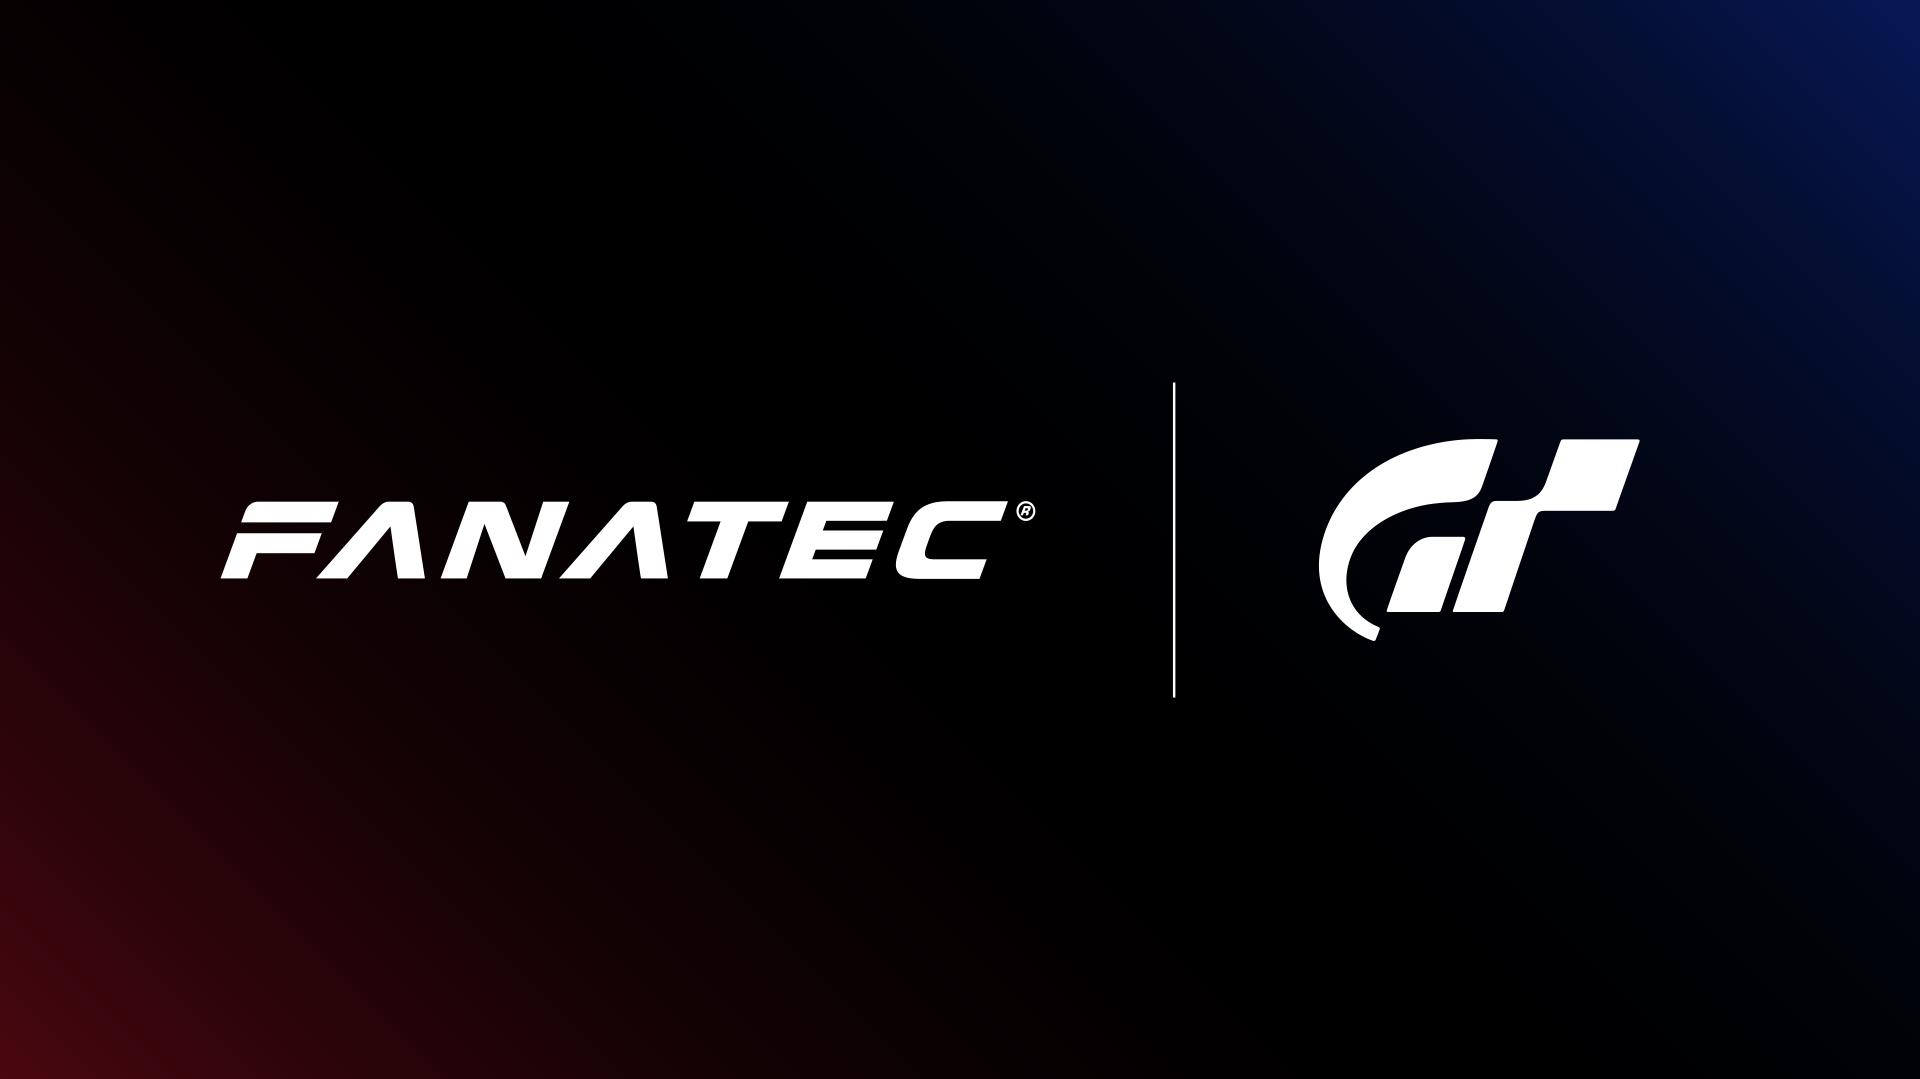 Fanatec And Gran Turismo Partner To Develop New Racing Peripherals